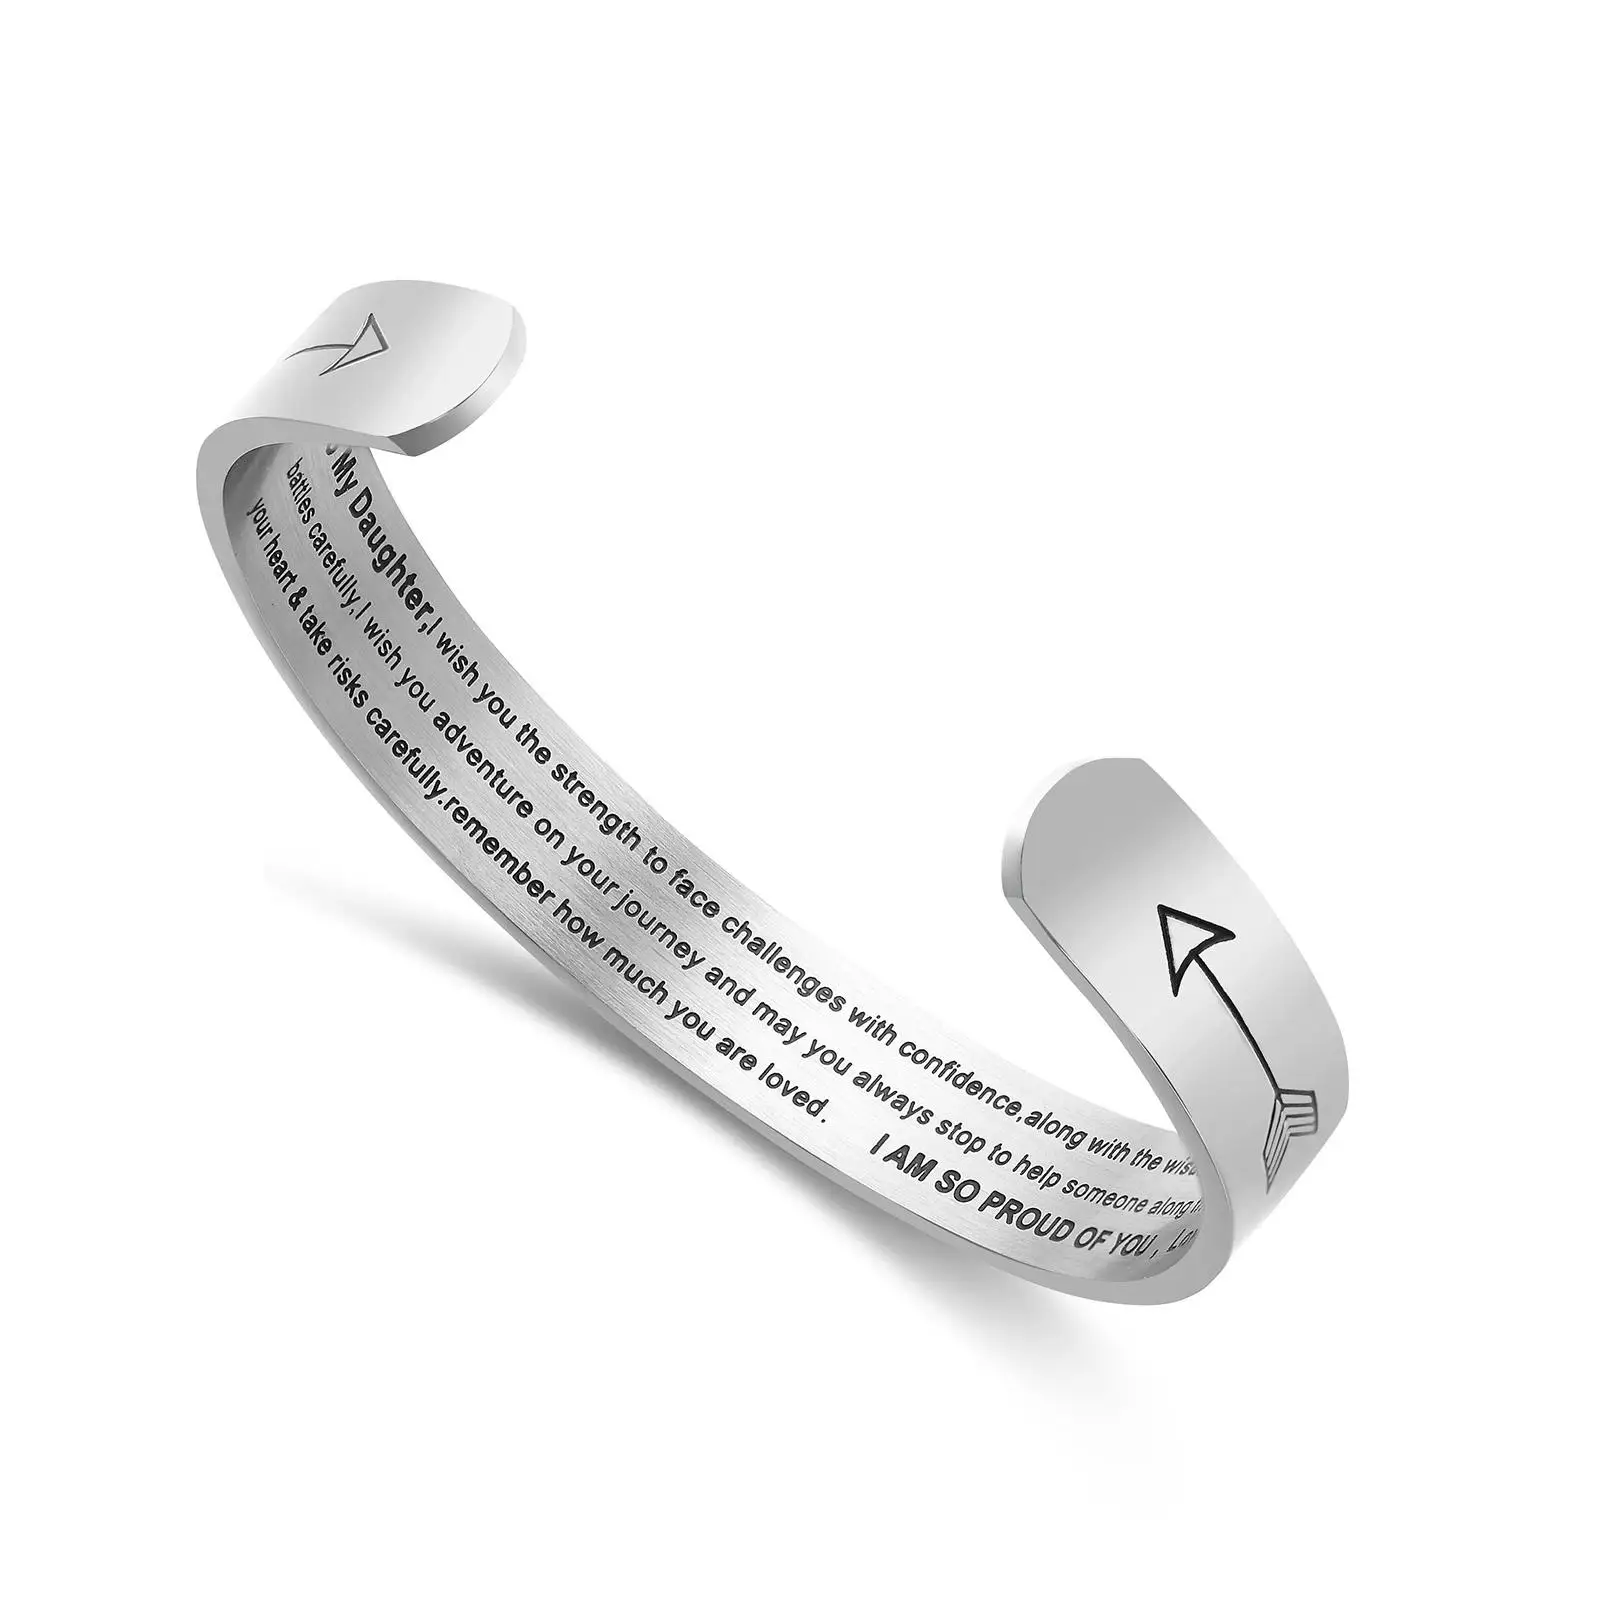 Stainless Steel Engraved Bangle Cuff Bracelet Gift for Girls Welsky Straighten Your Crown Inspirational Bracelet